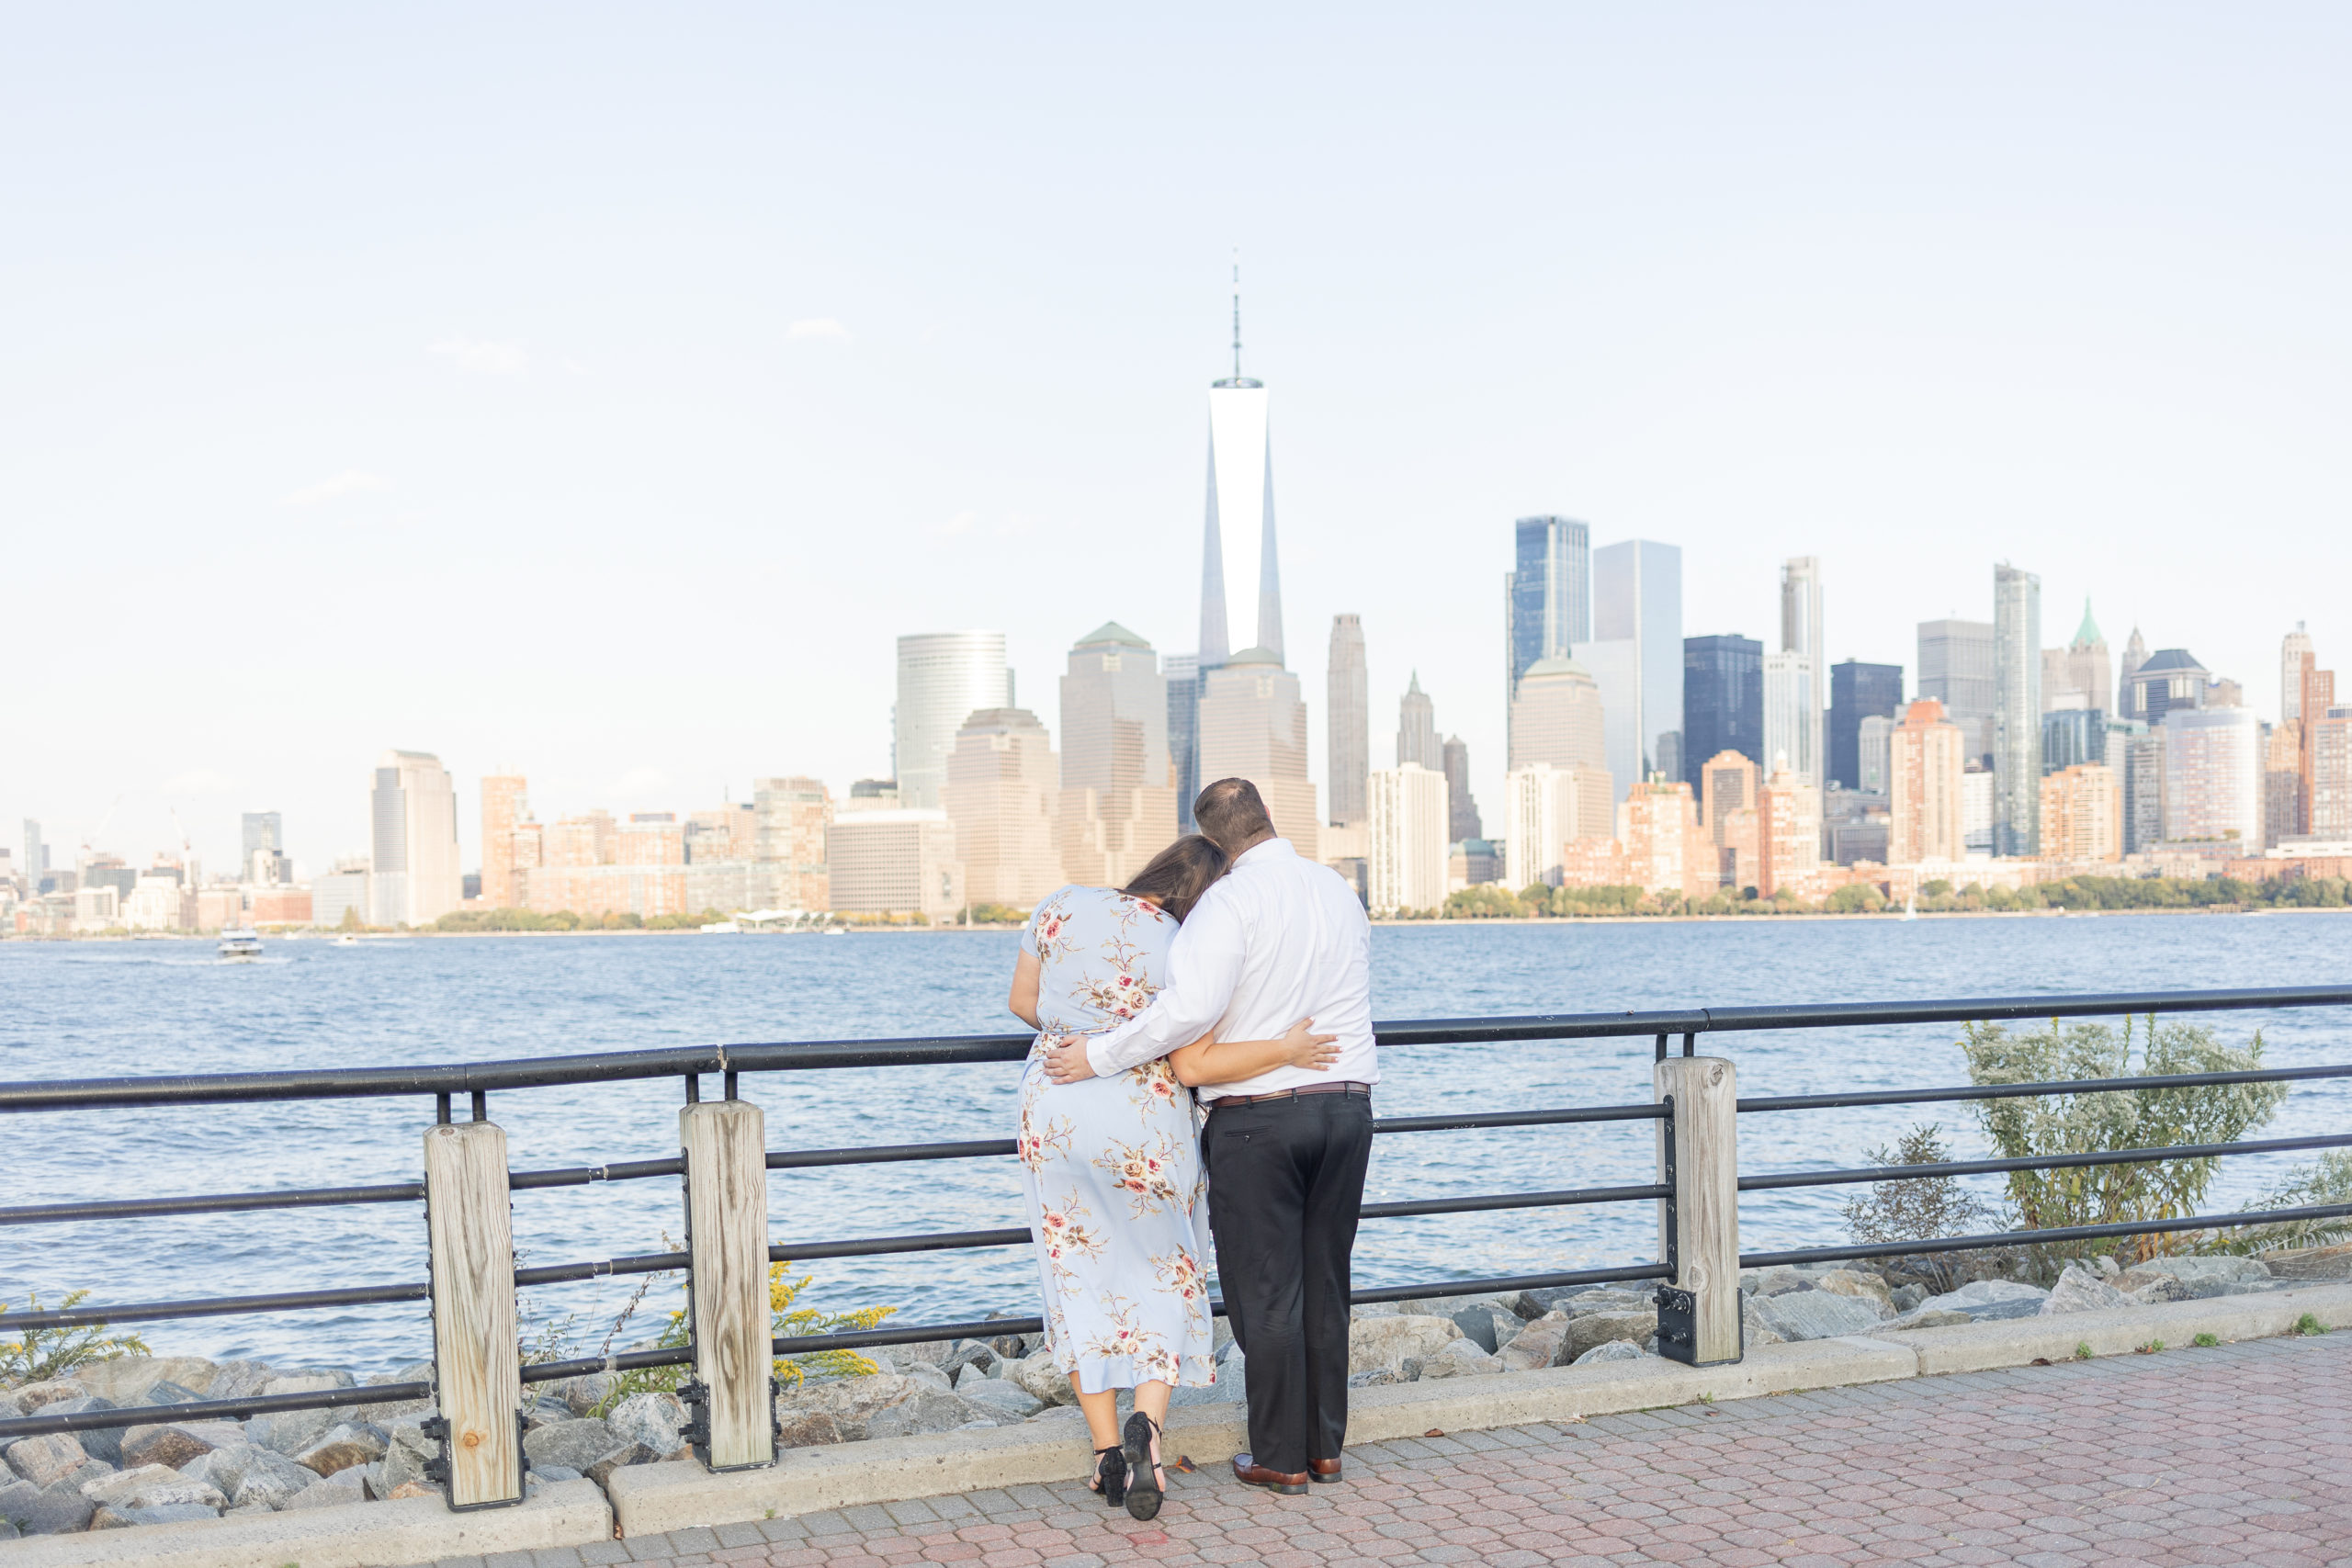 liberty state park nyc skyline engagement photos, nj wedding photographer, liberty state park wedding, liberty house wedding photographer